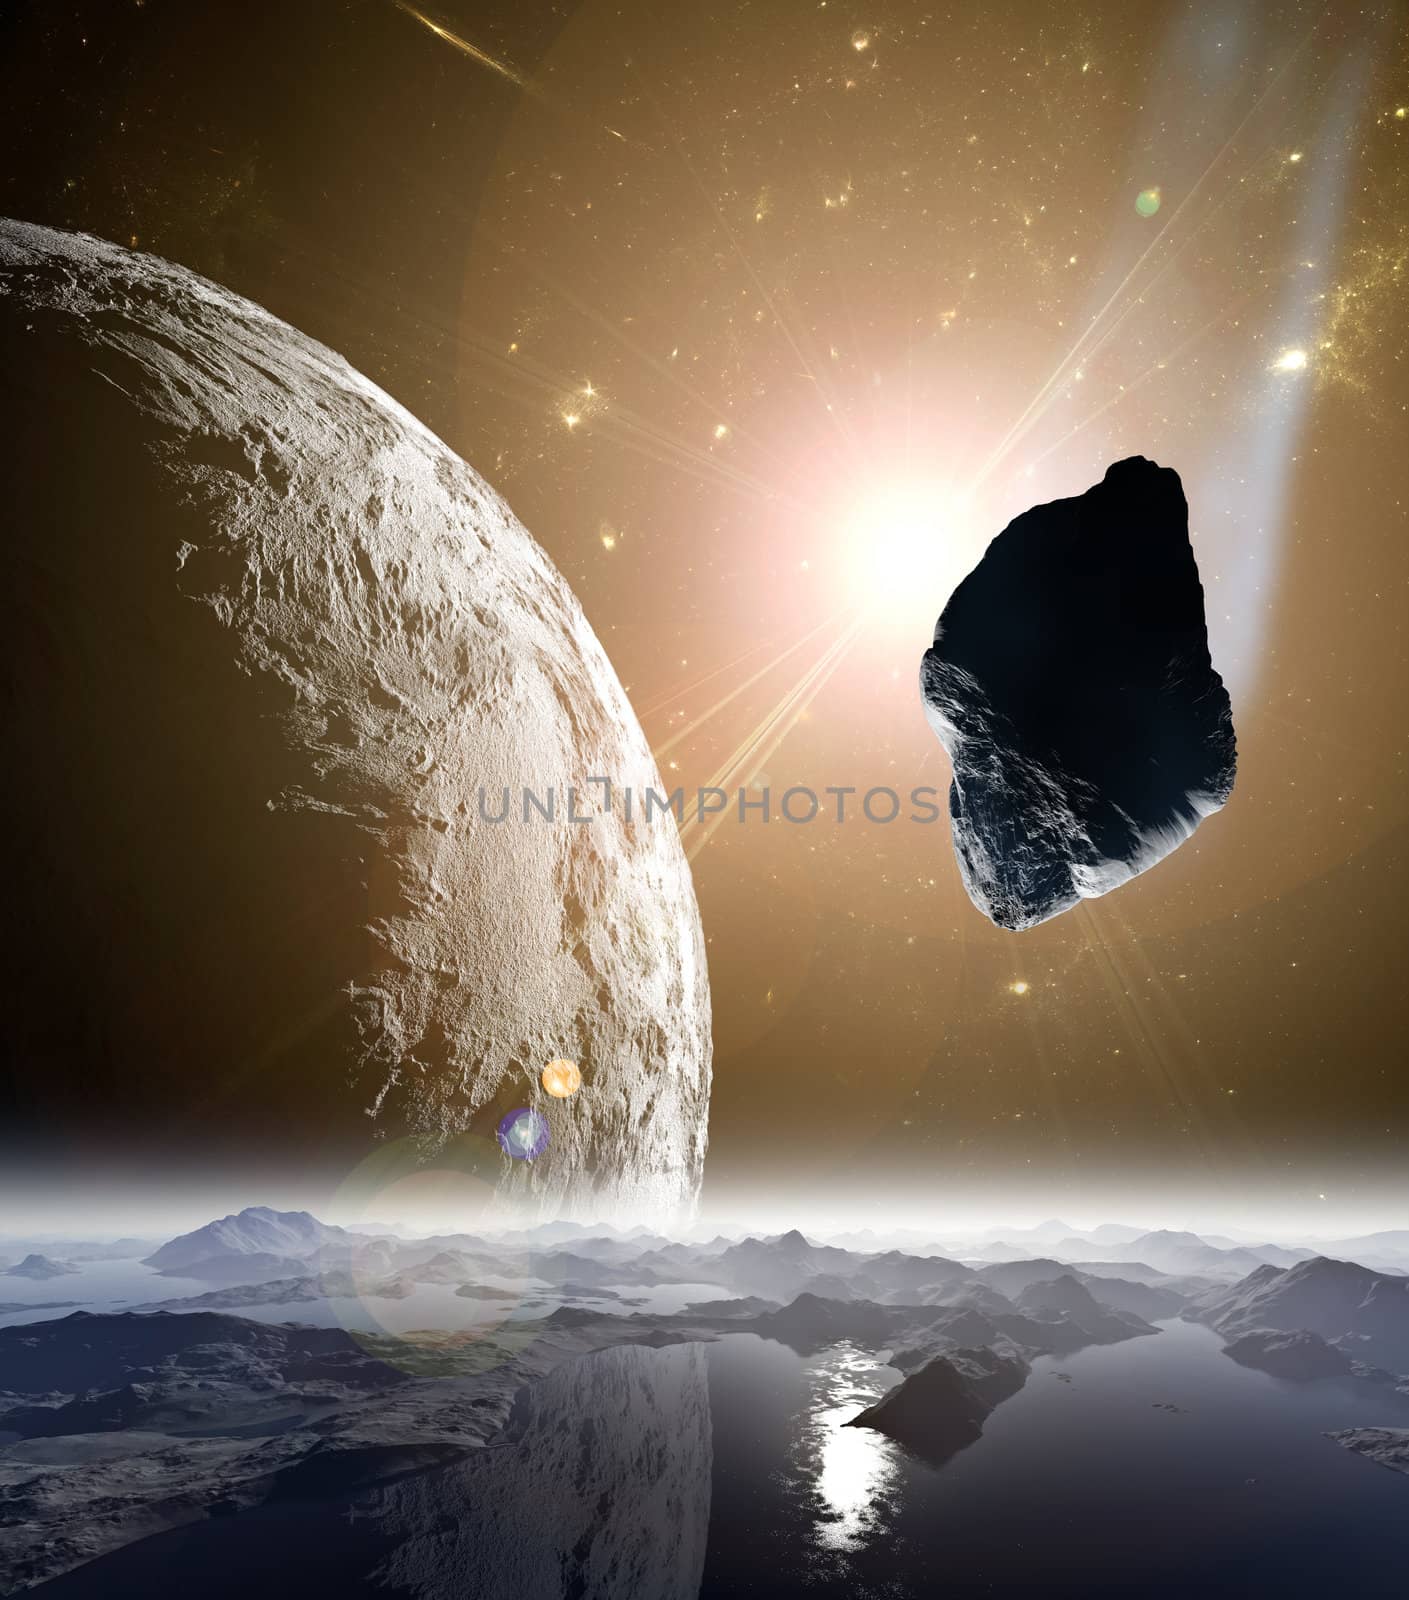 Attack of the asteroid on the planet in the universe. Abstract illustration of a meteor impact.